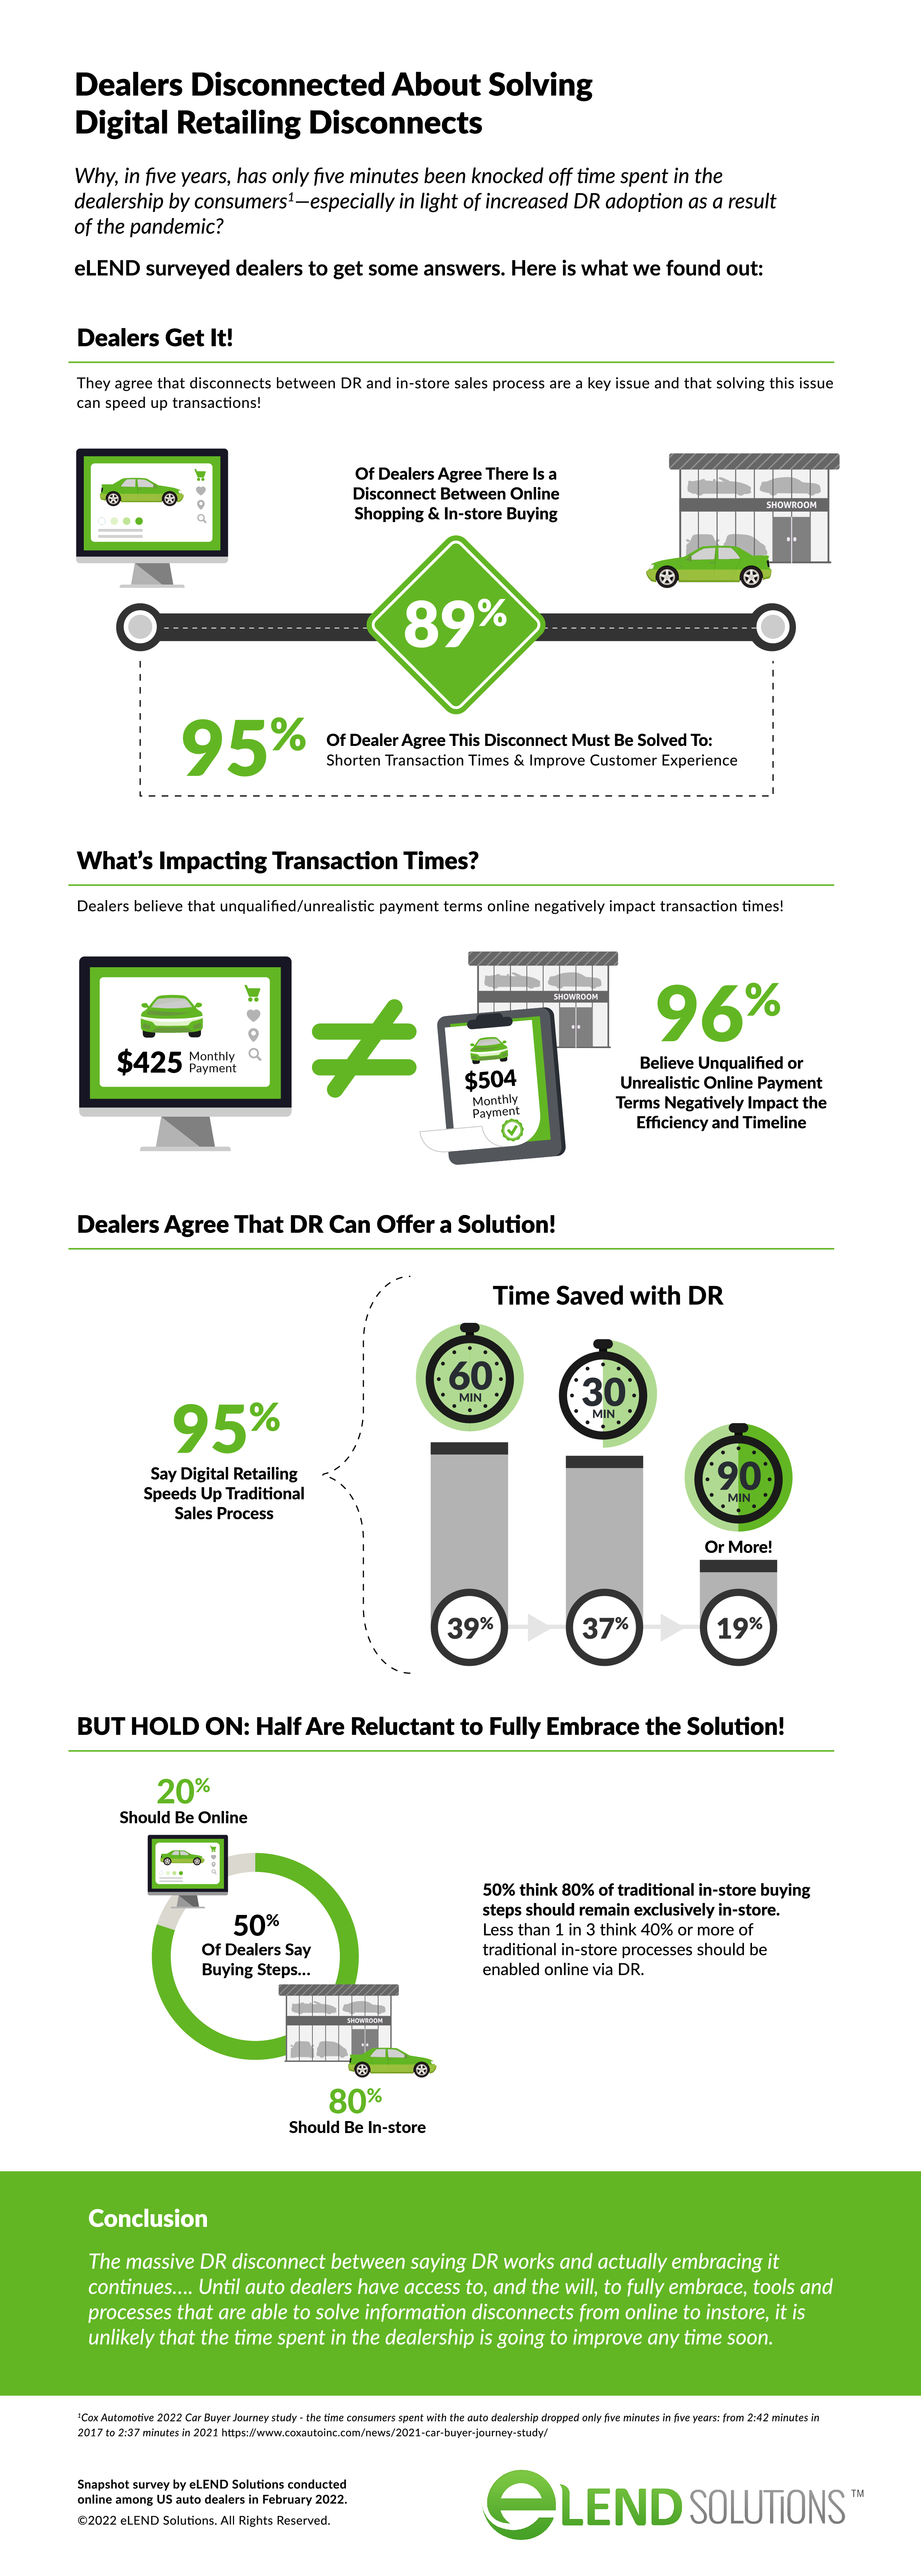 eLEND Solutions Infographic: Auto Dealers Still Disconnected about Solving Digital Retailing Disconnects